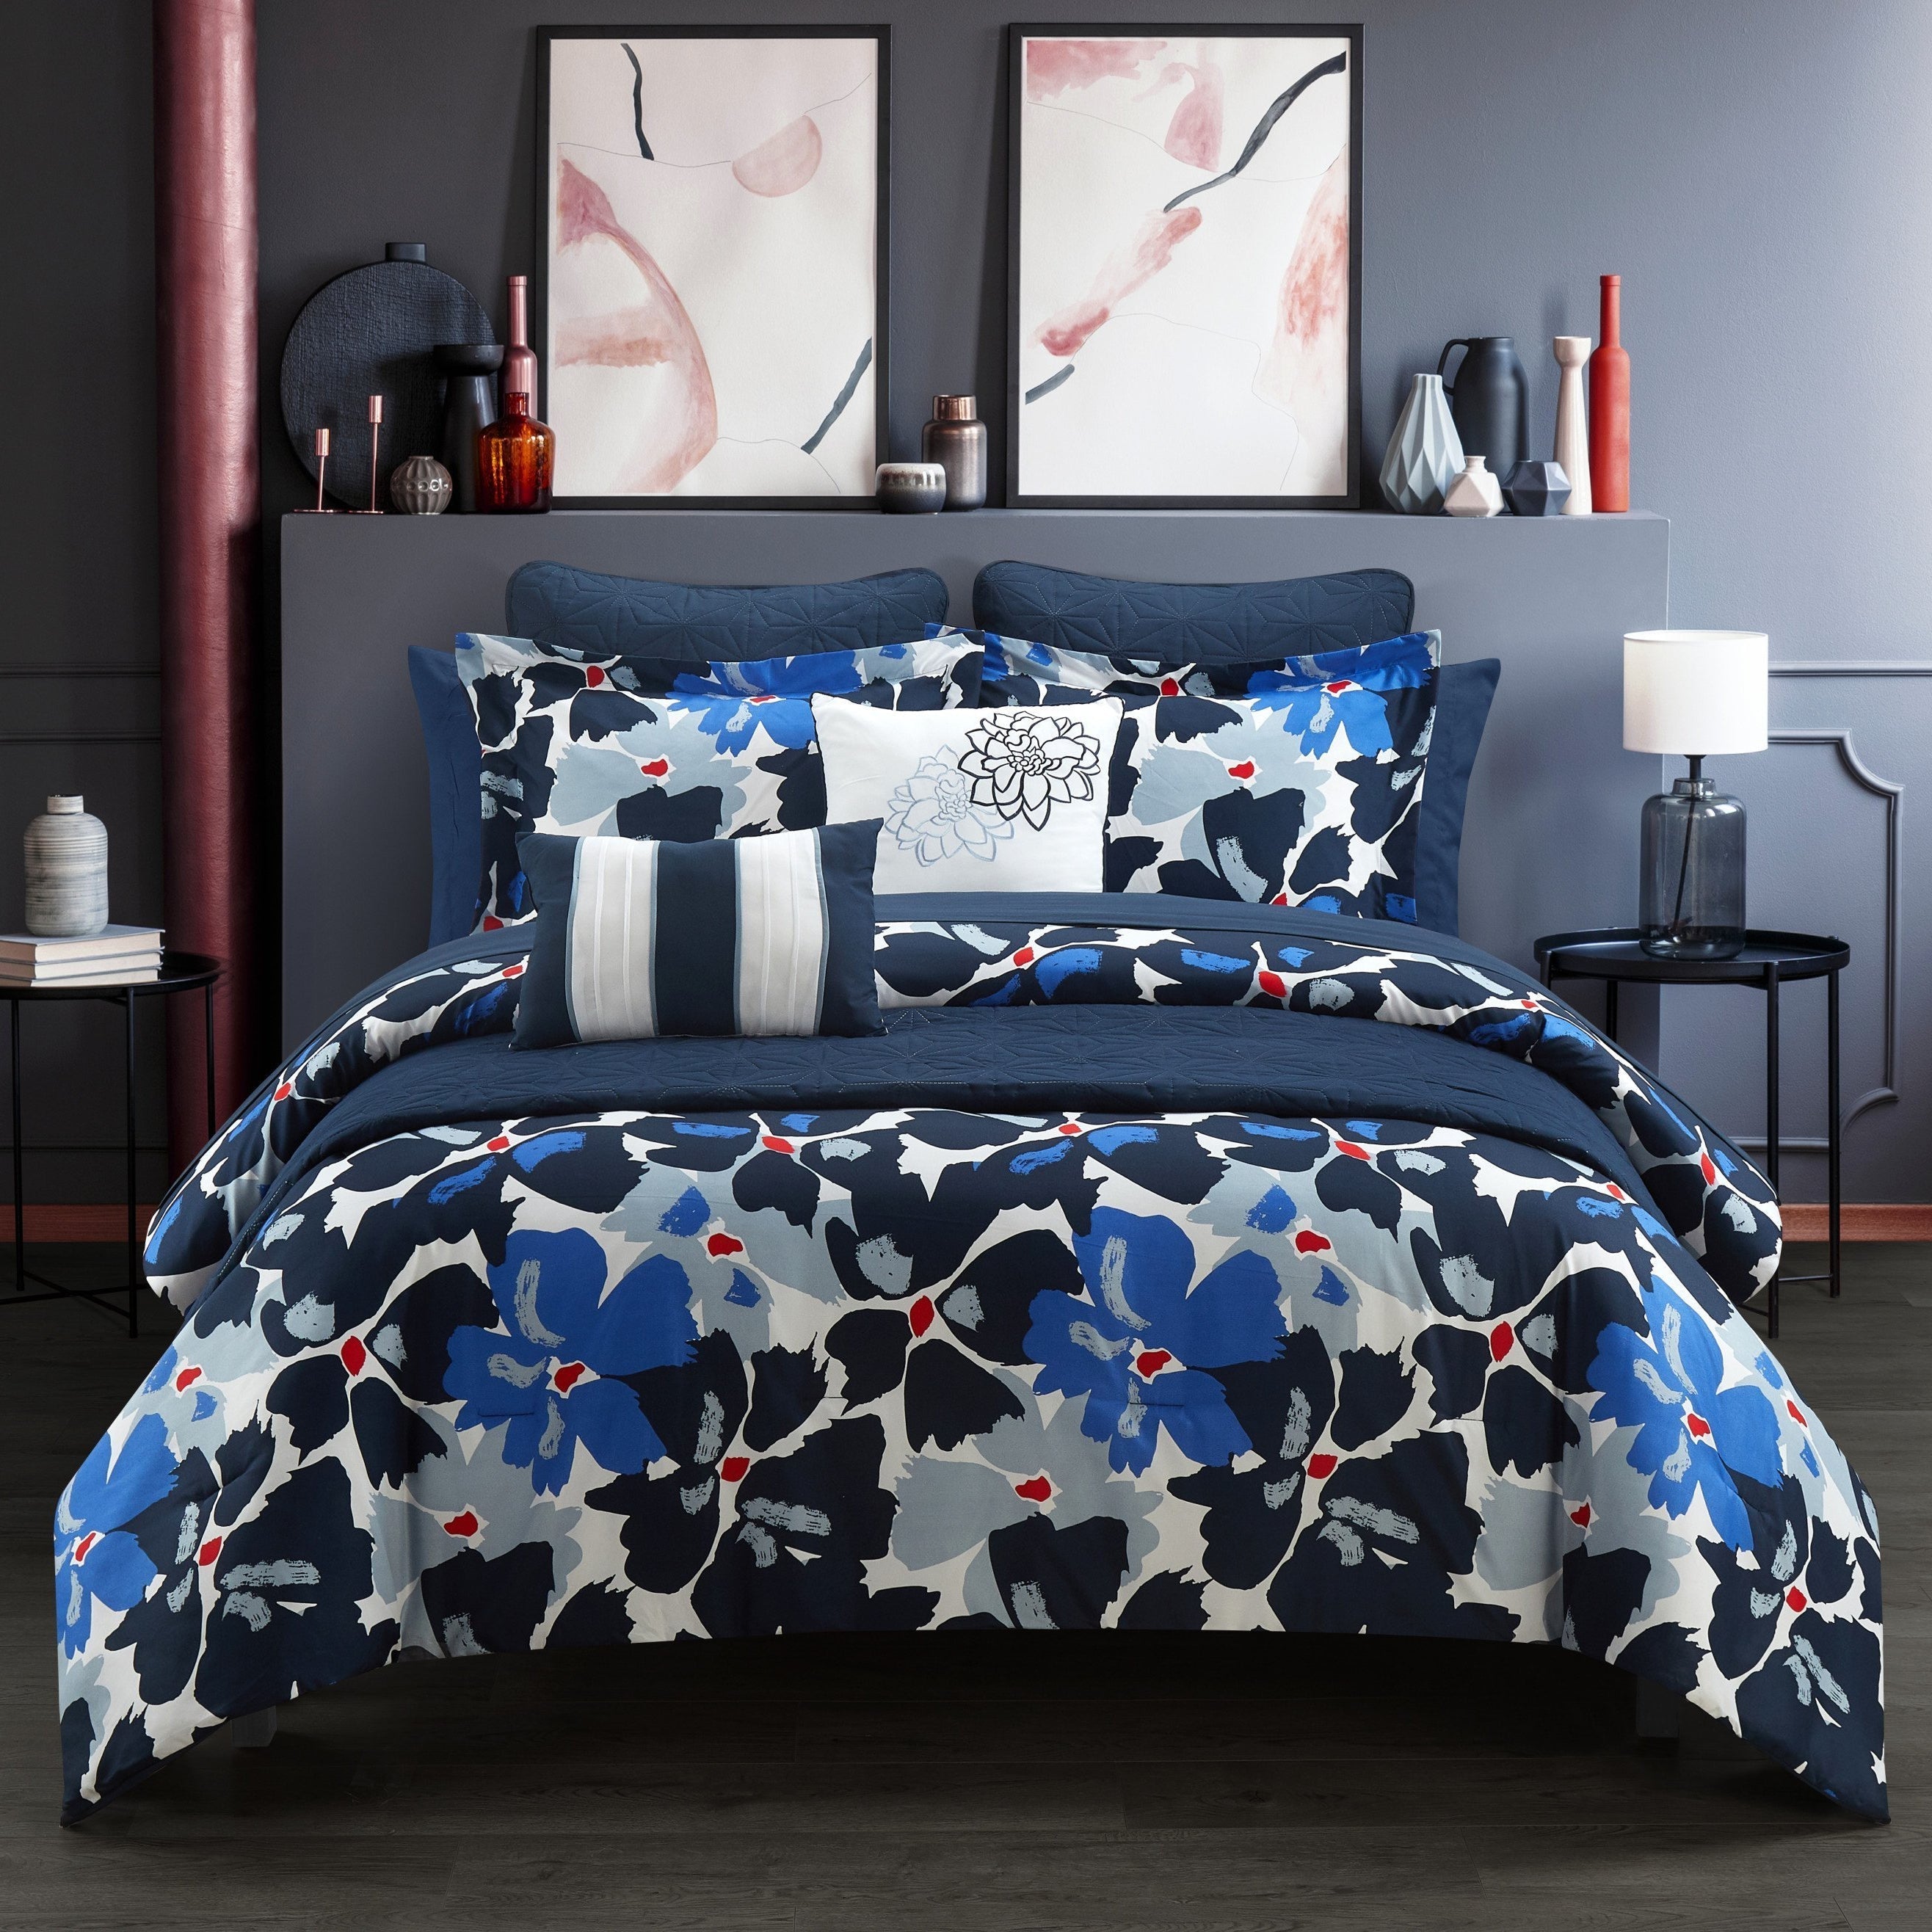 Malea 12 Piece Floral Comforter and Quilt Set